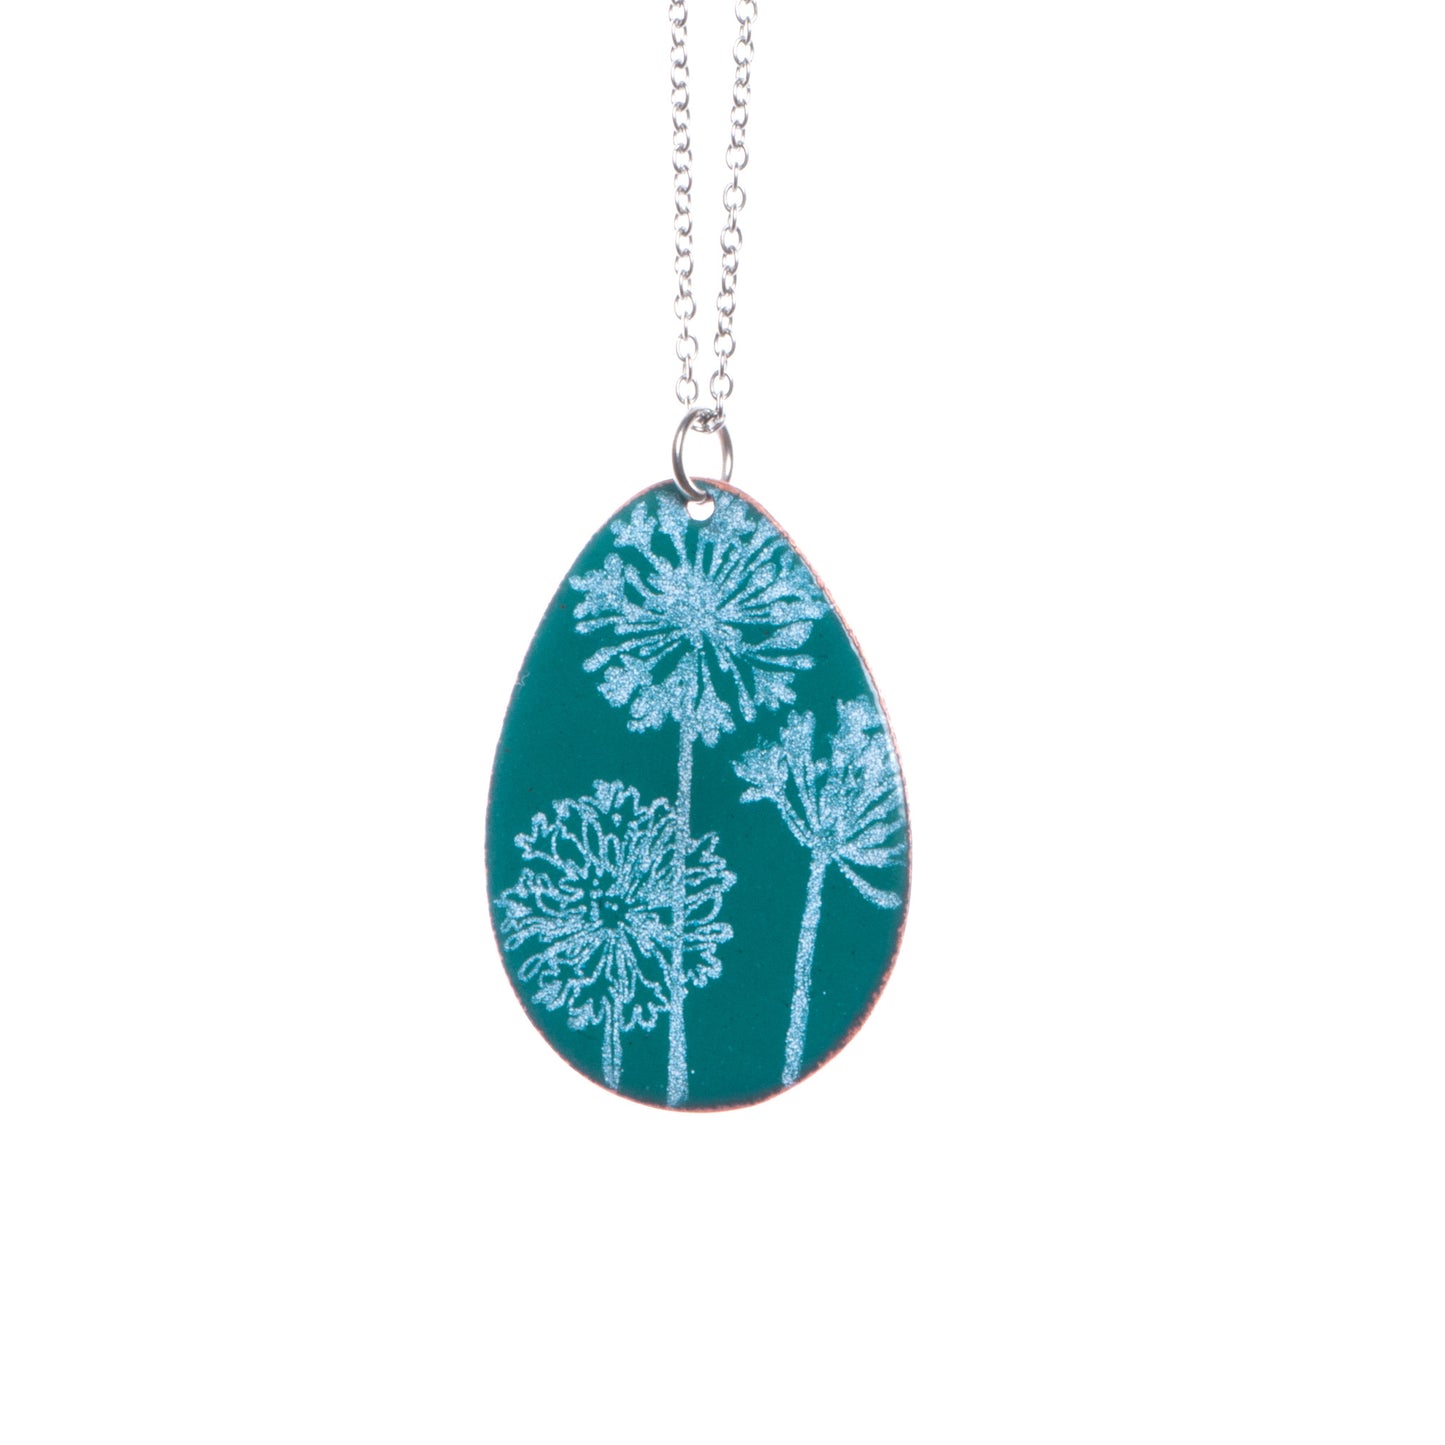 Dandelion Necklace in Teal & White